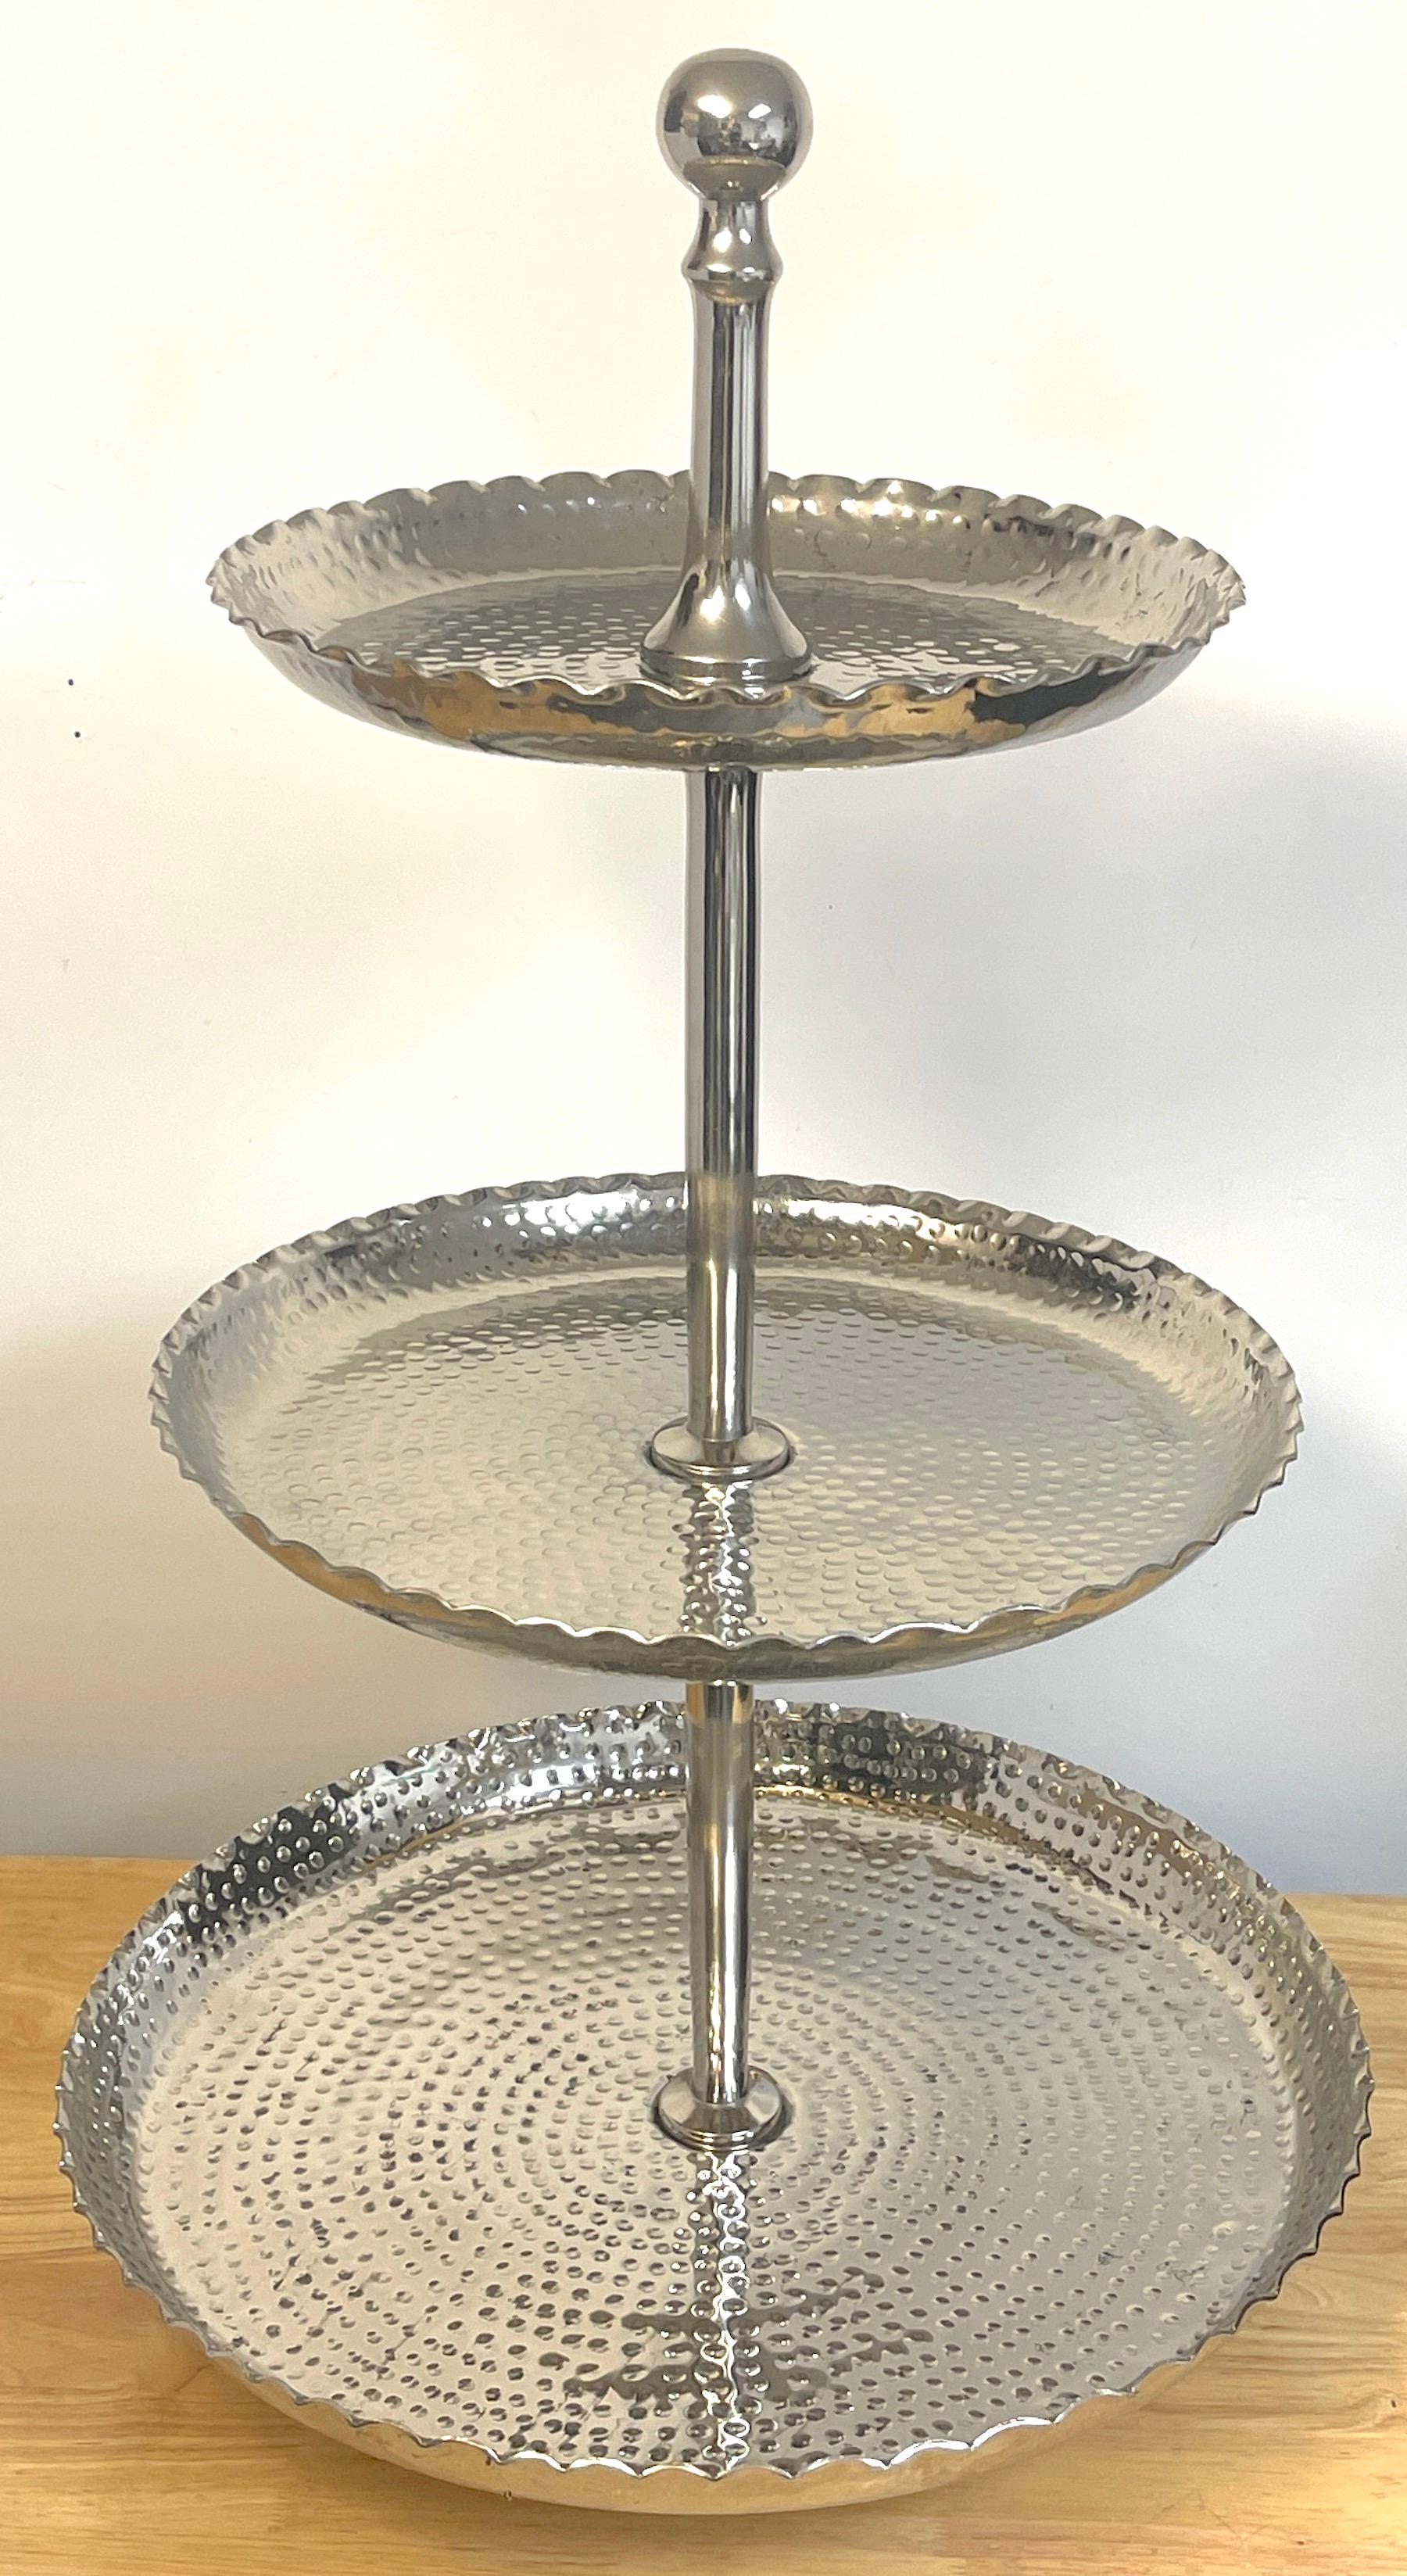 Large modern hammered silverplated 3 tier stand, attributed to Sarreid
Standing 35